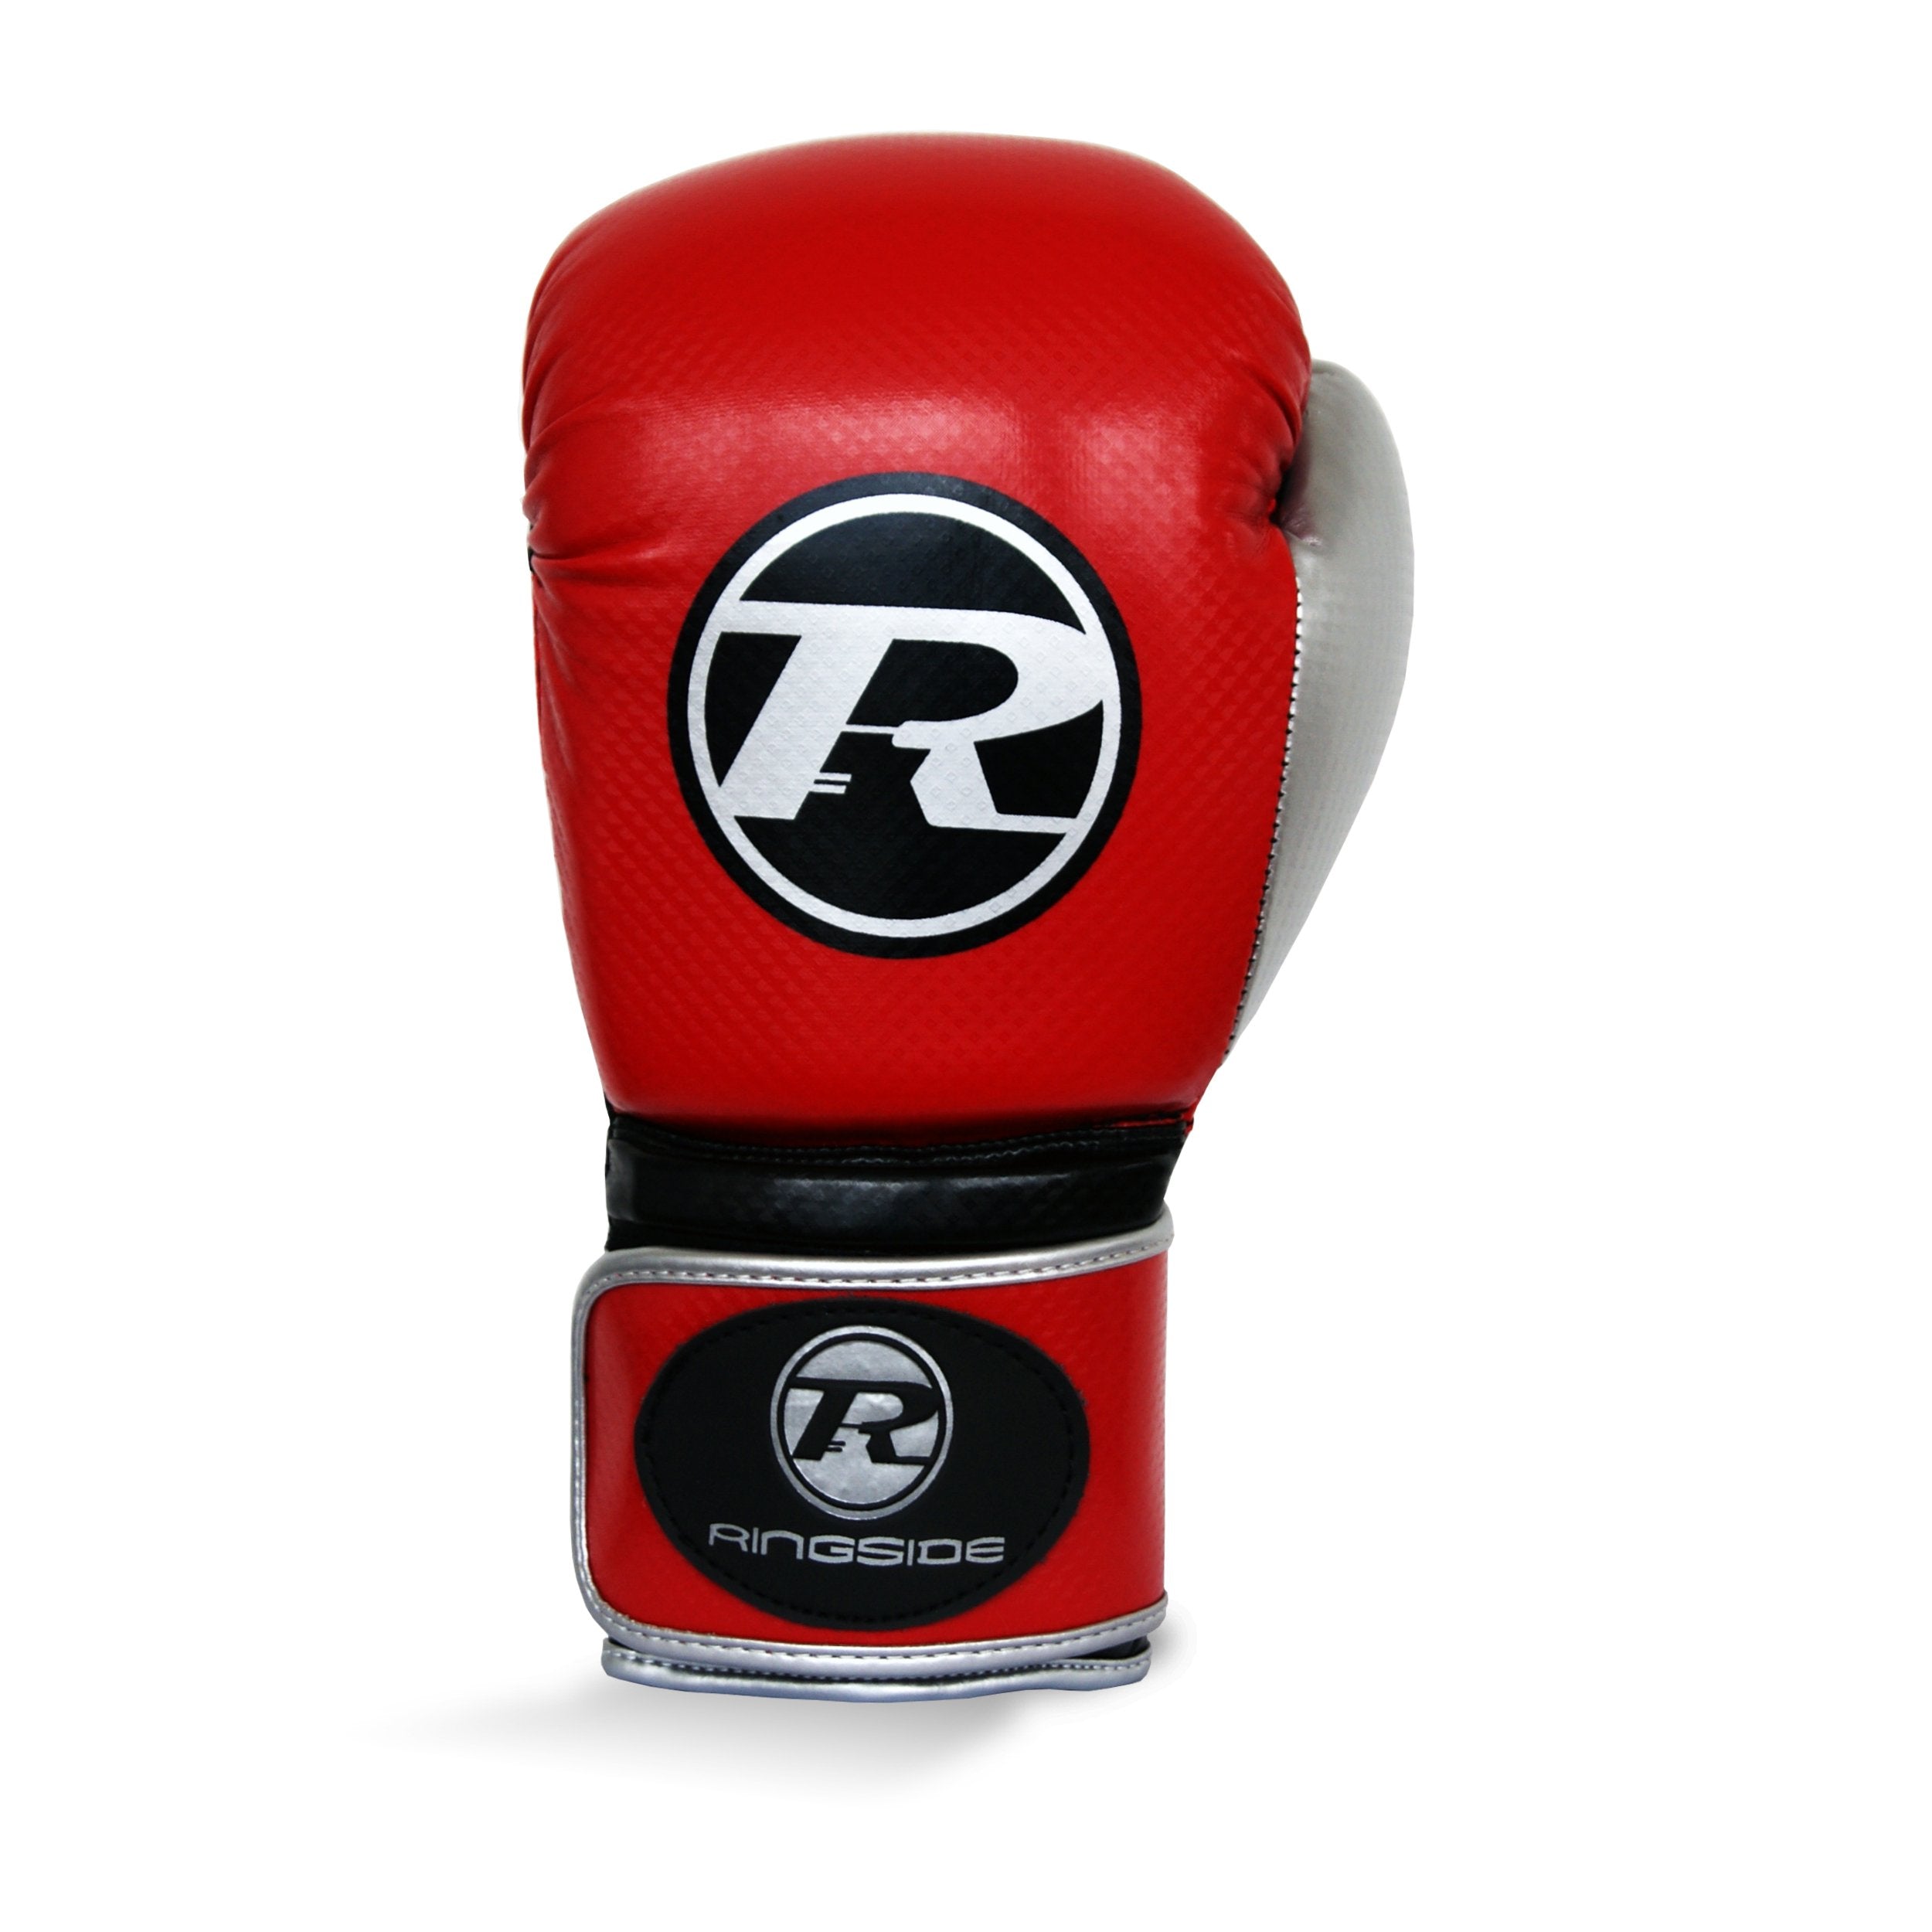 Pro Fitness Synthetic Leather Boxing Glove Metallic Red / Black / Silver